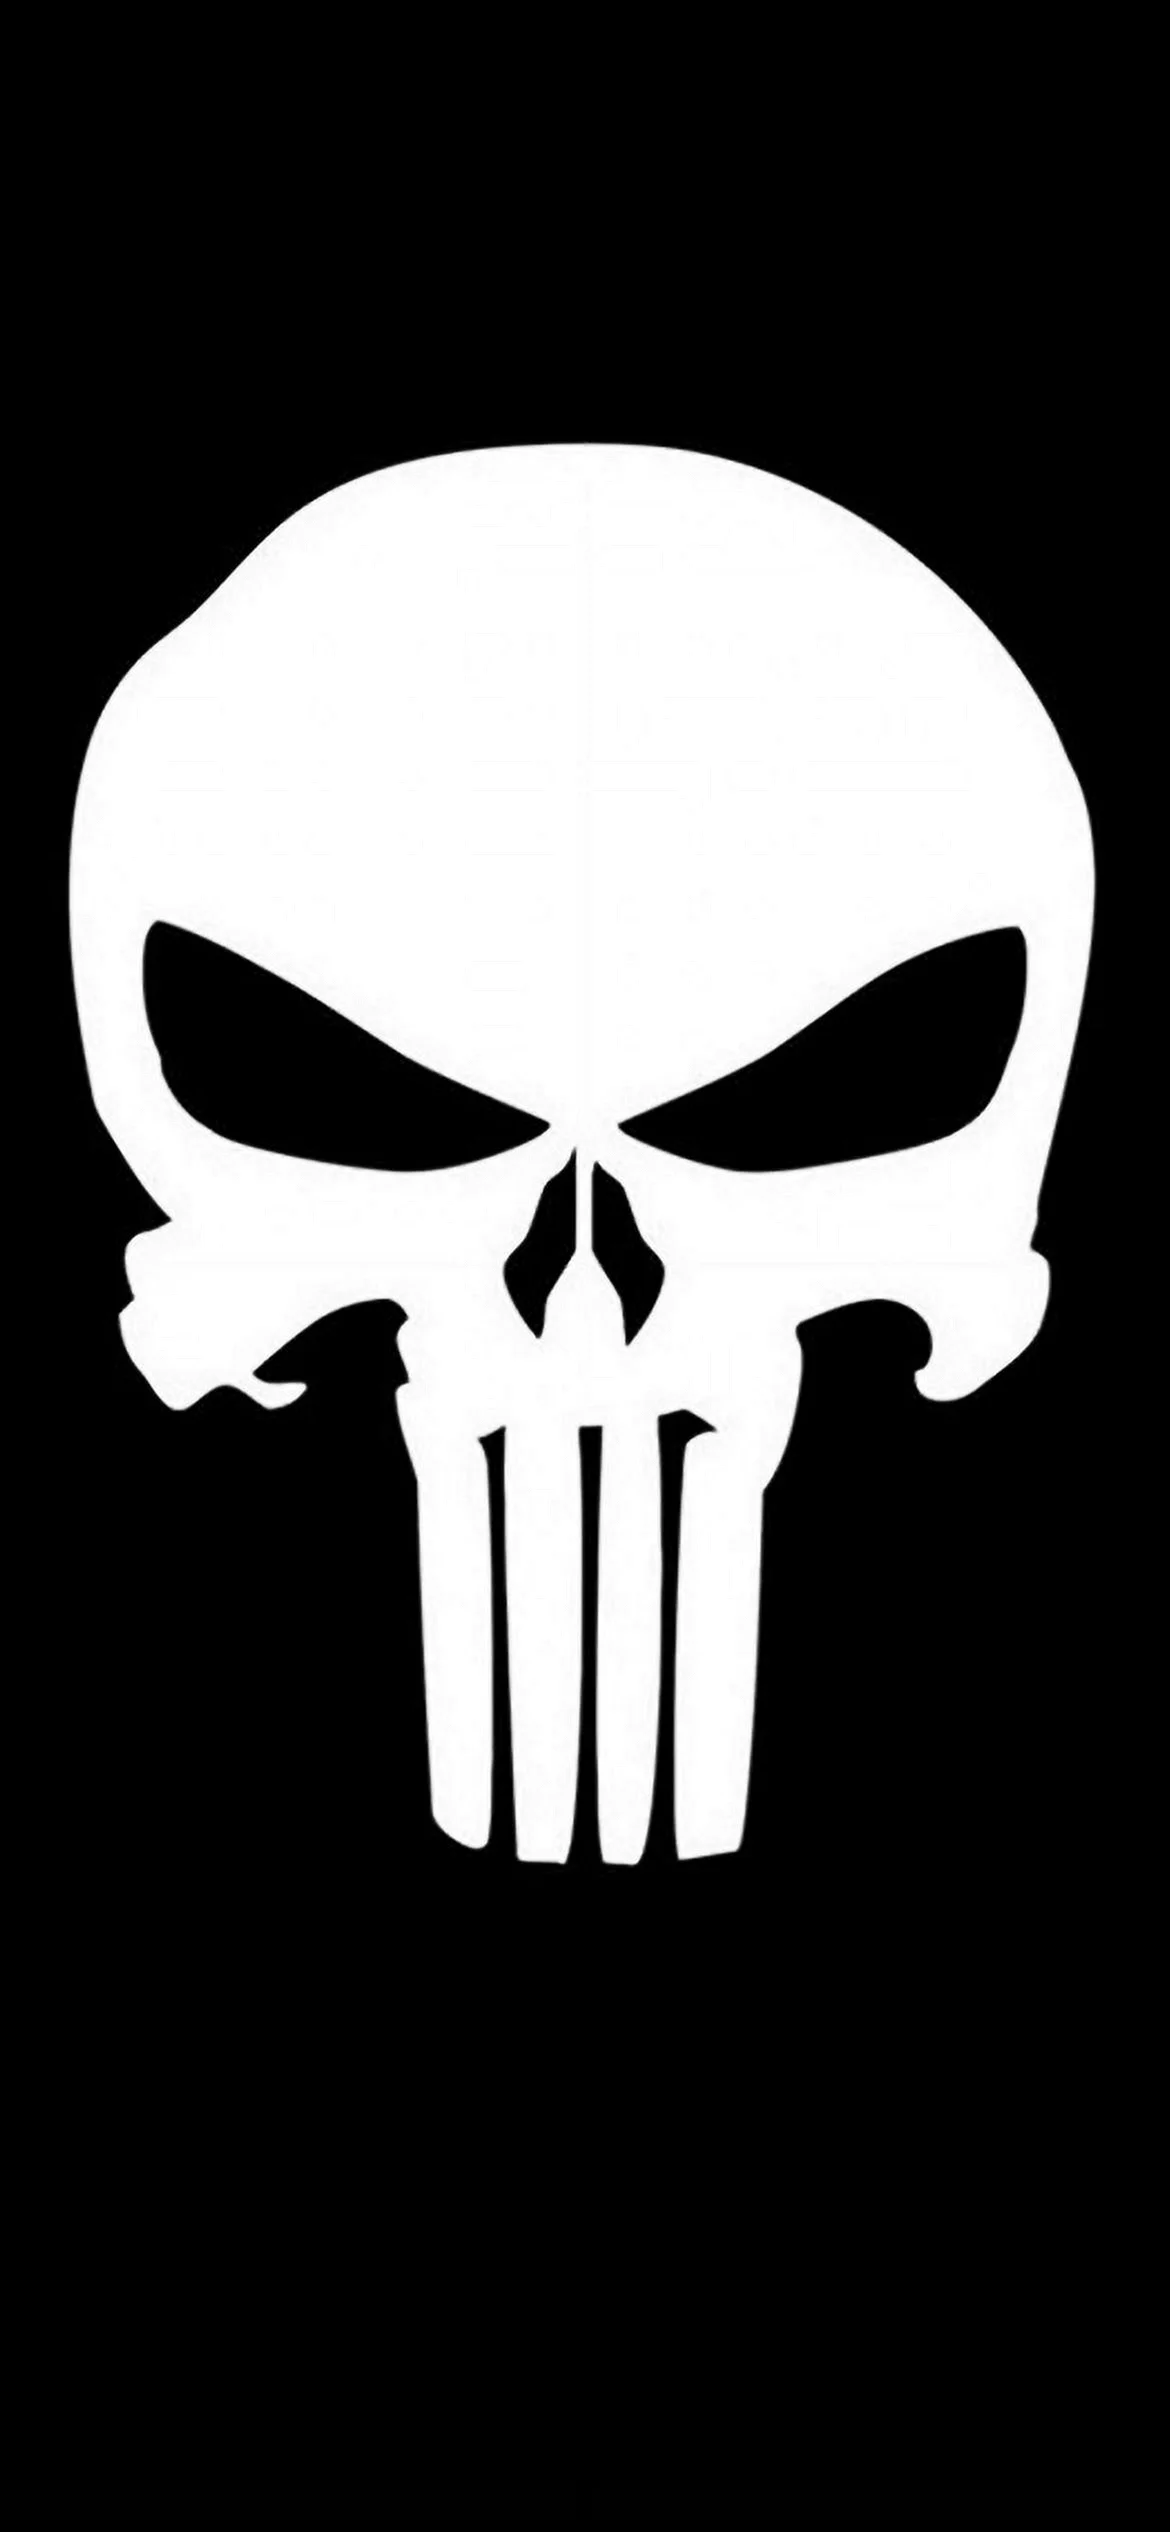 Sticker Punisher Wallpaper for iPhone 12 Pro